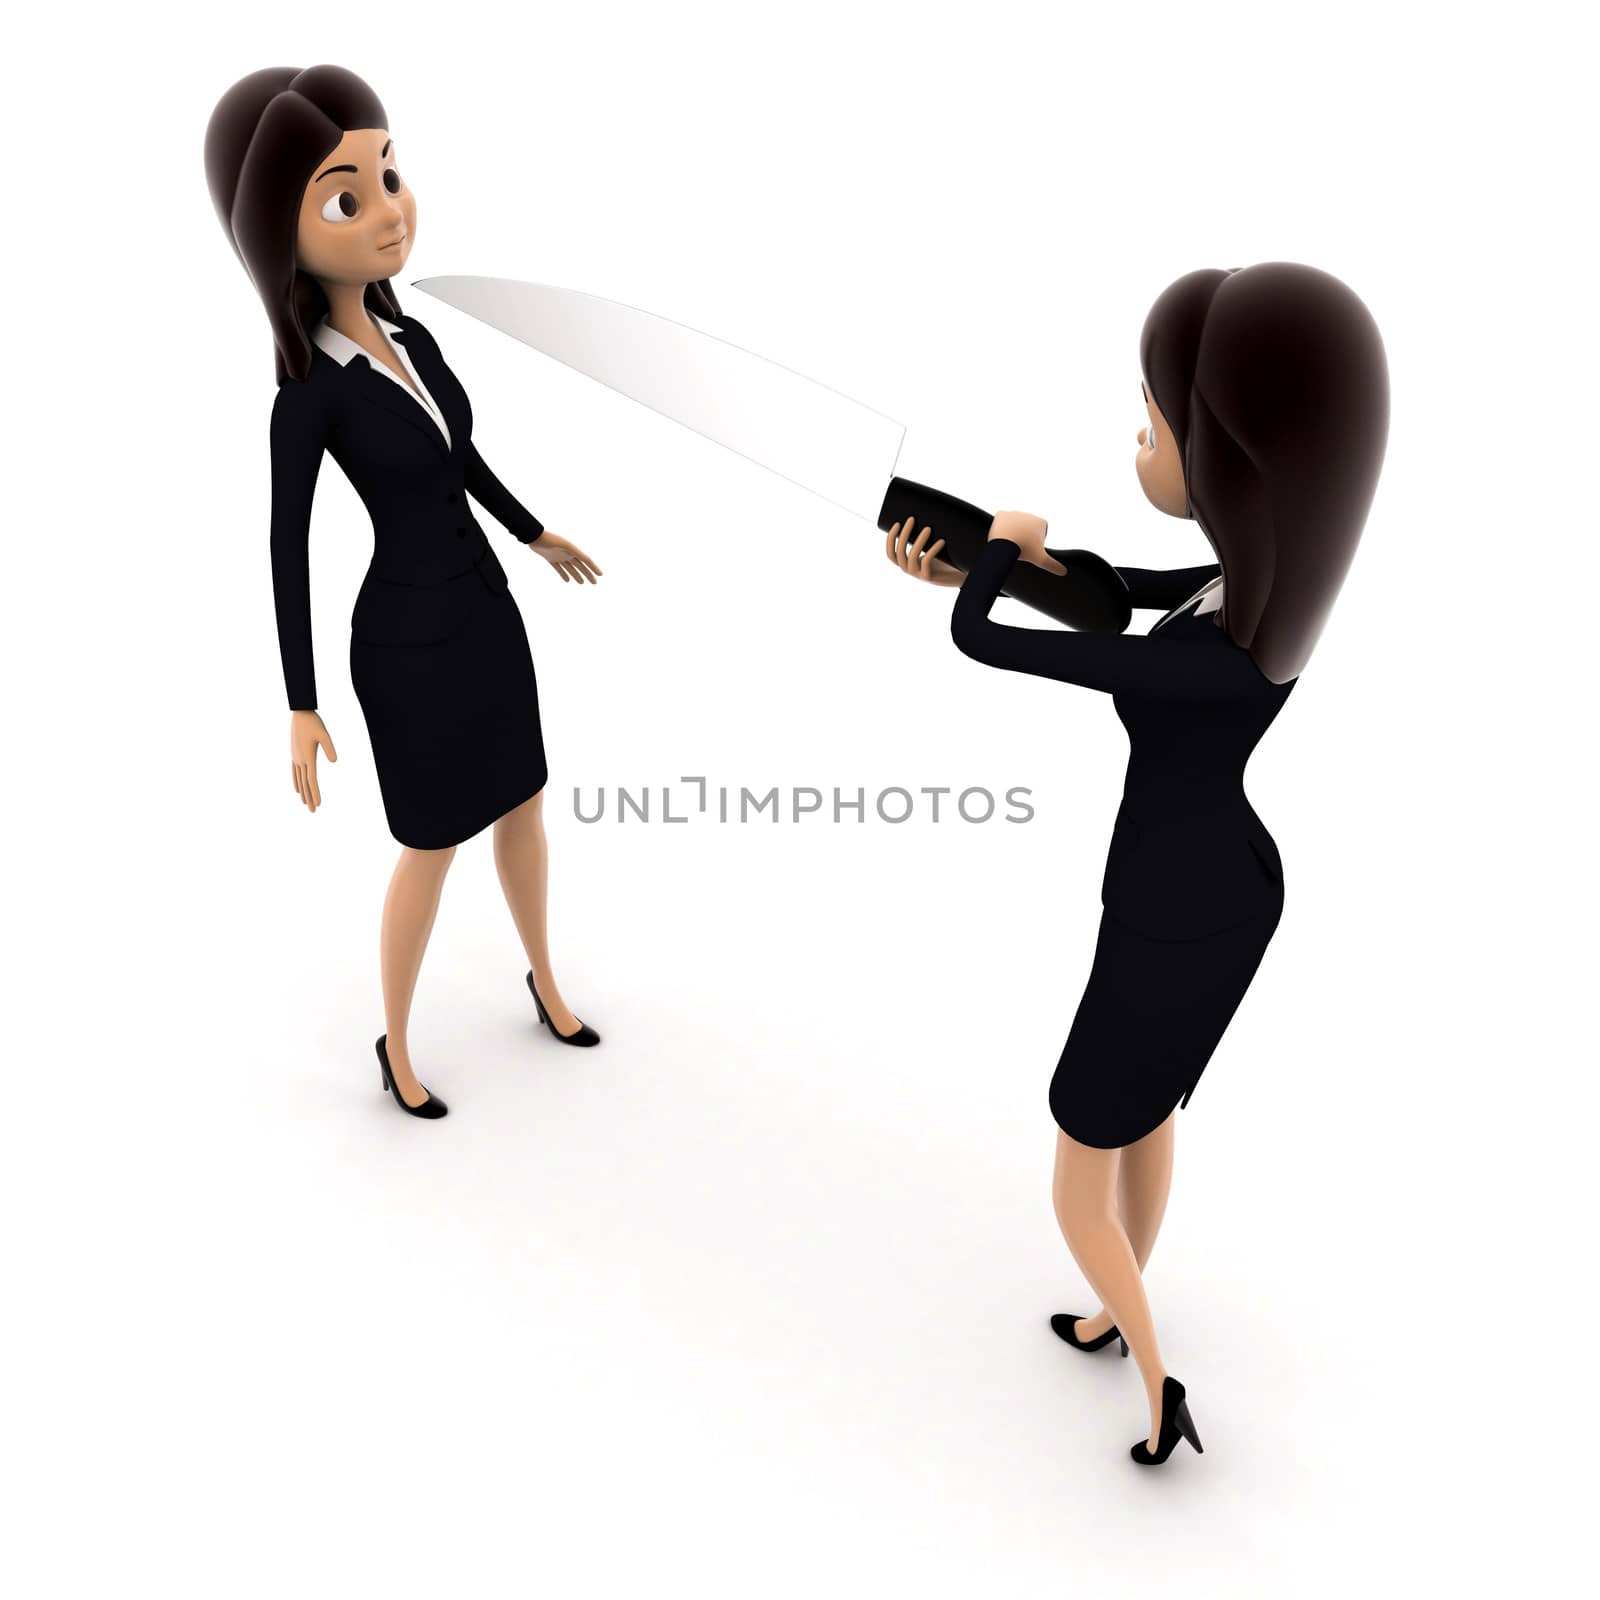 3d woman showing big knife to another woman concept on white background, top angle view